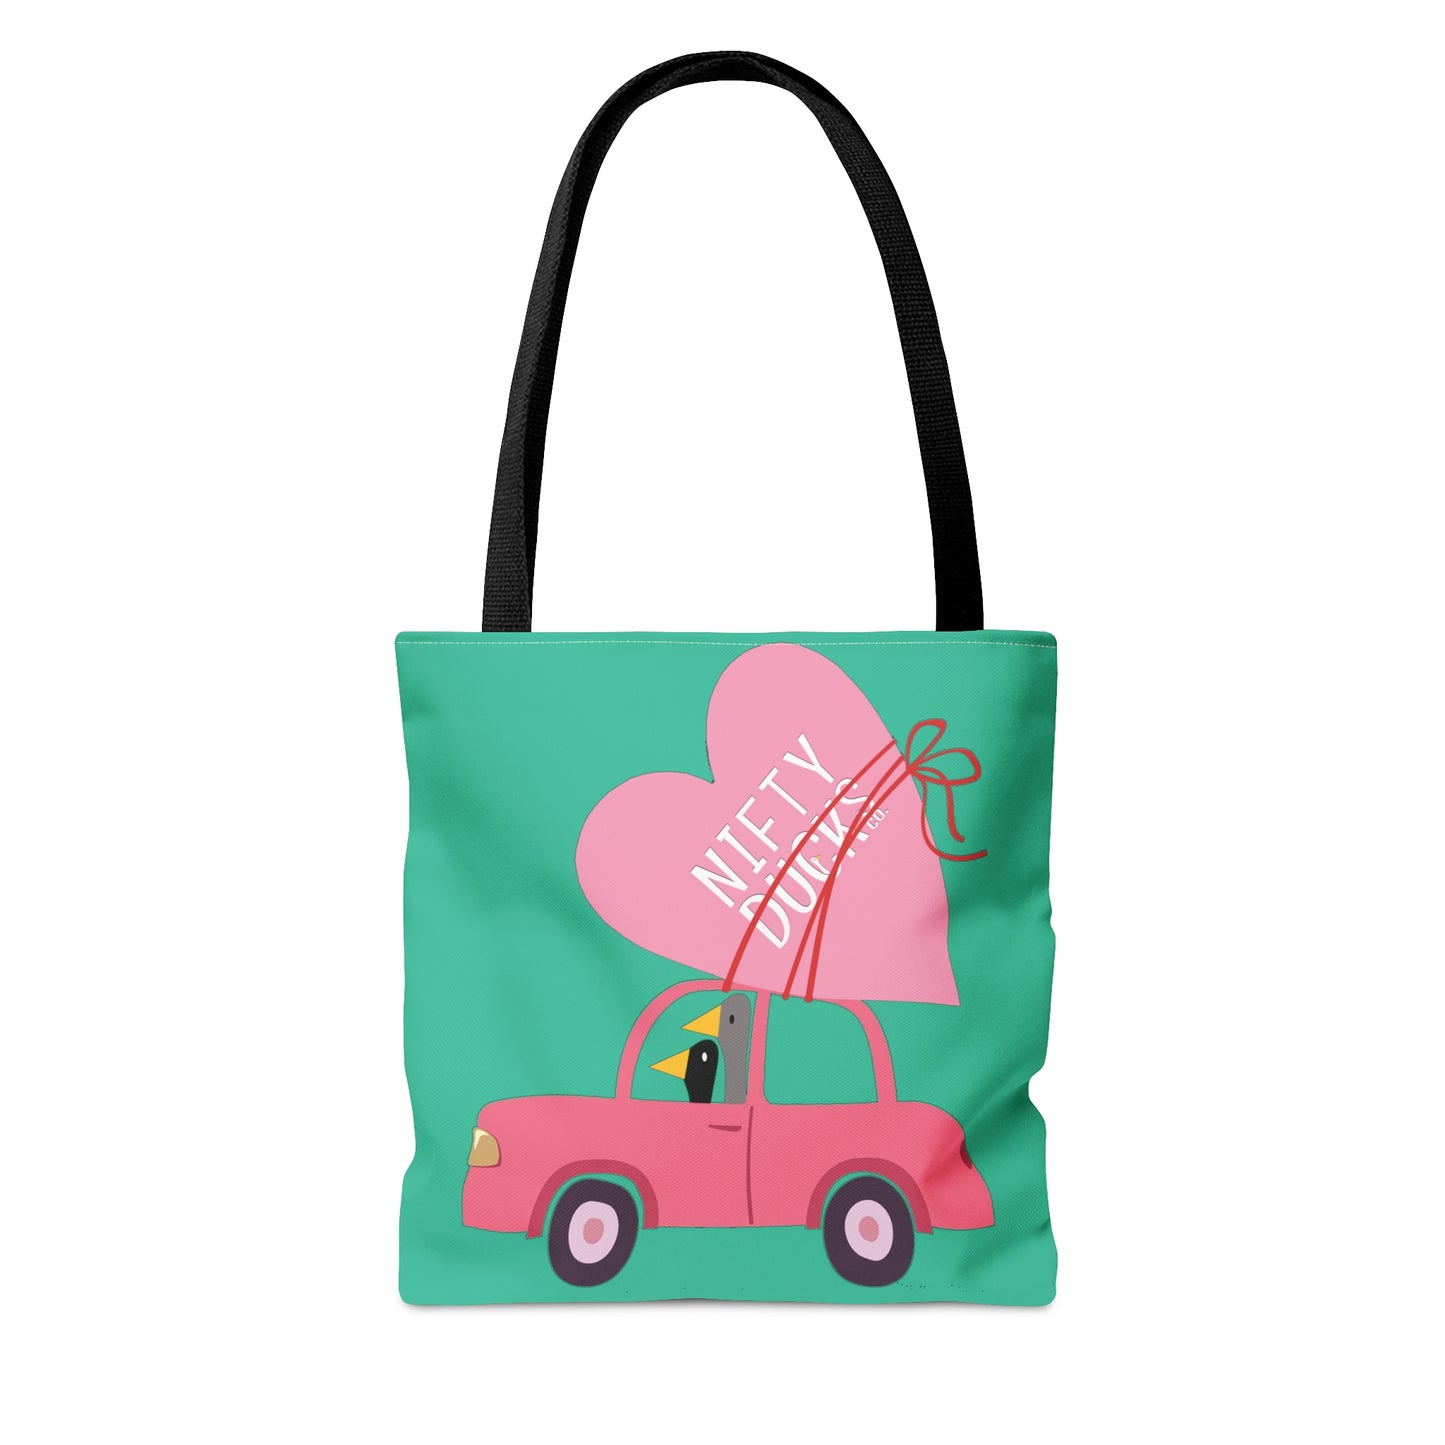 Ducks delivering a lot of love - Turquoise 12d3ad - Tote Bag